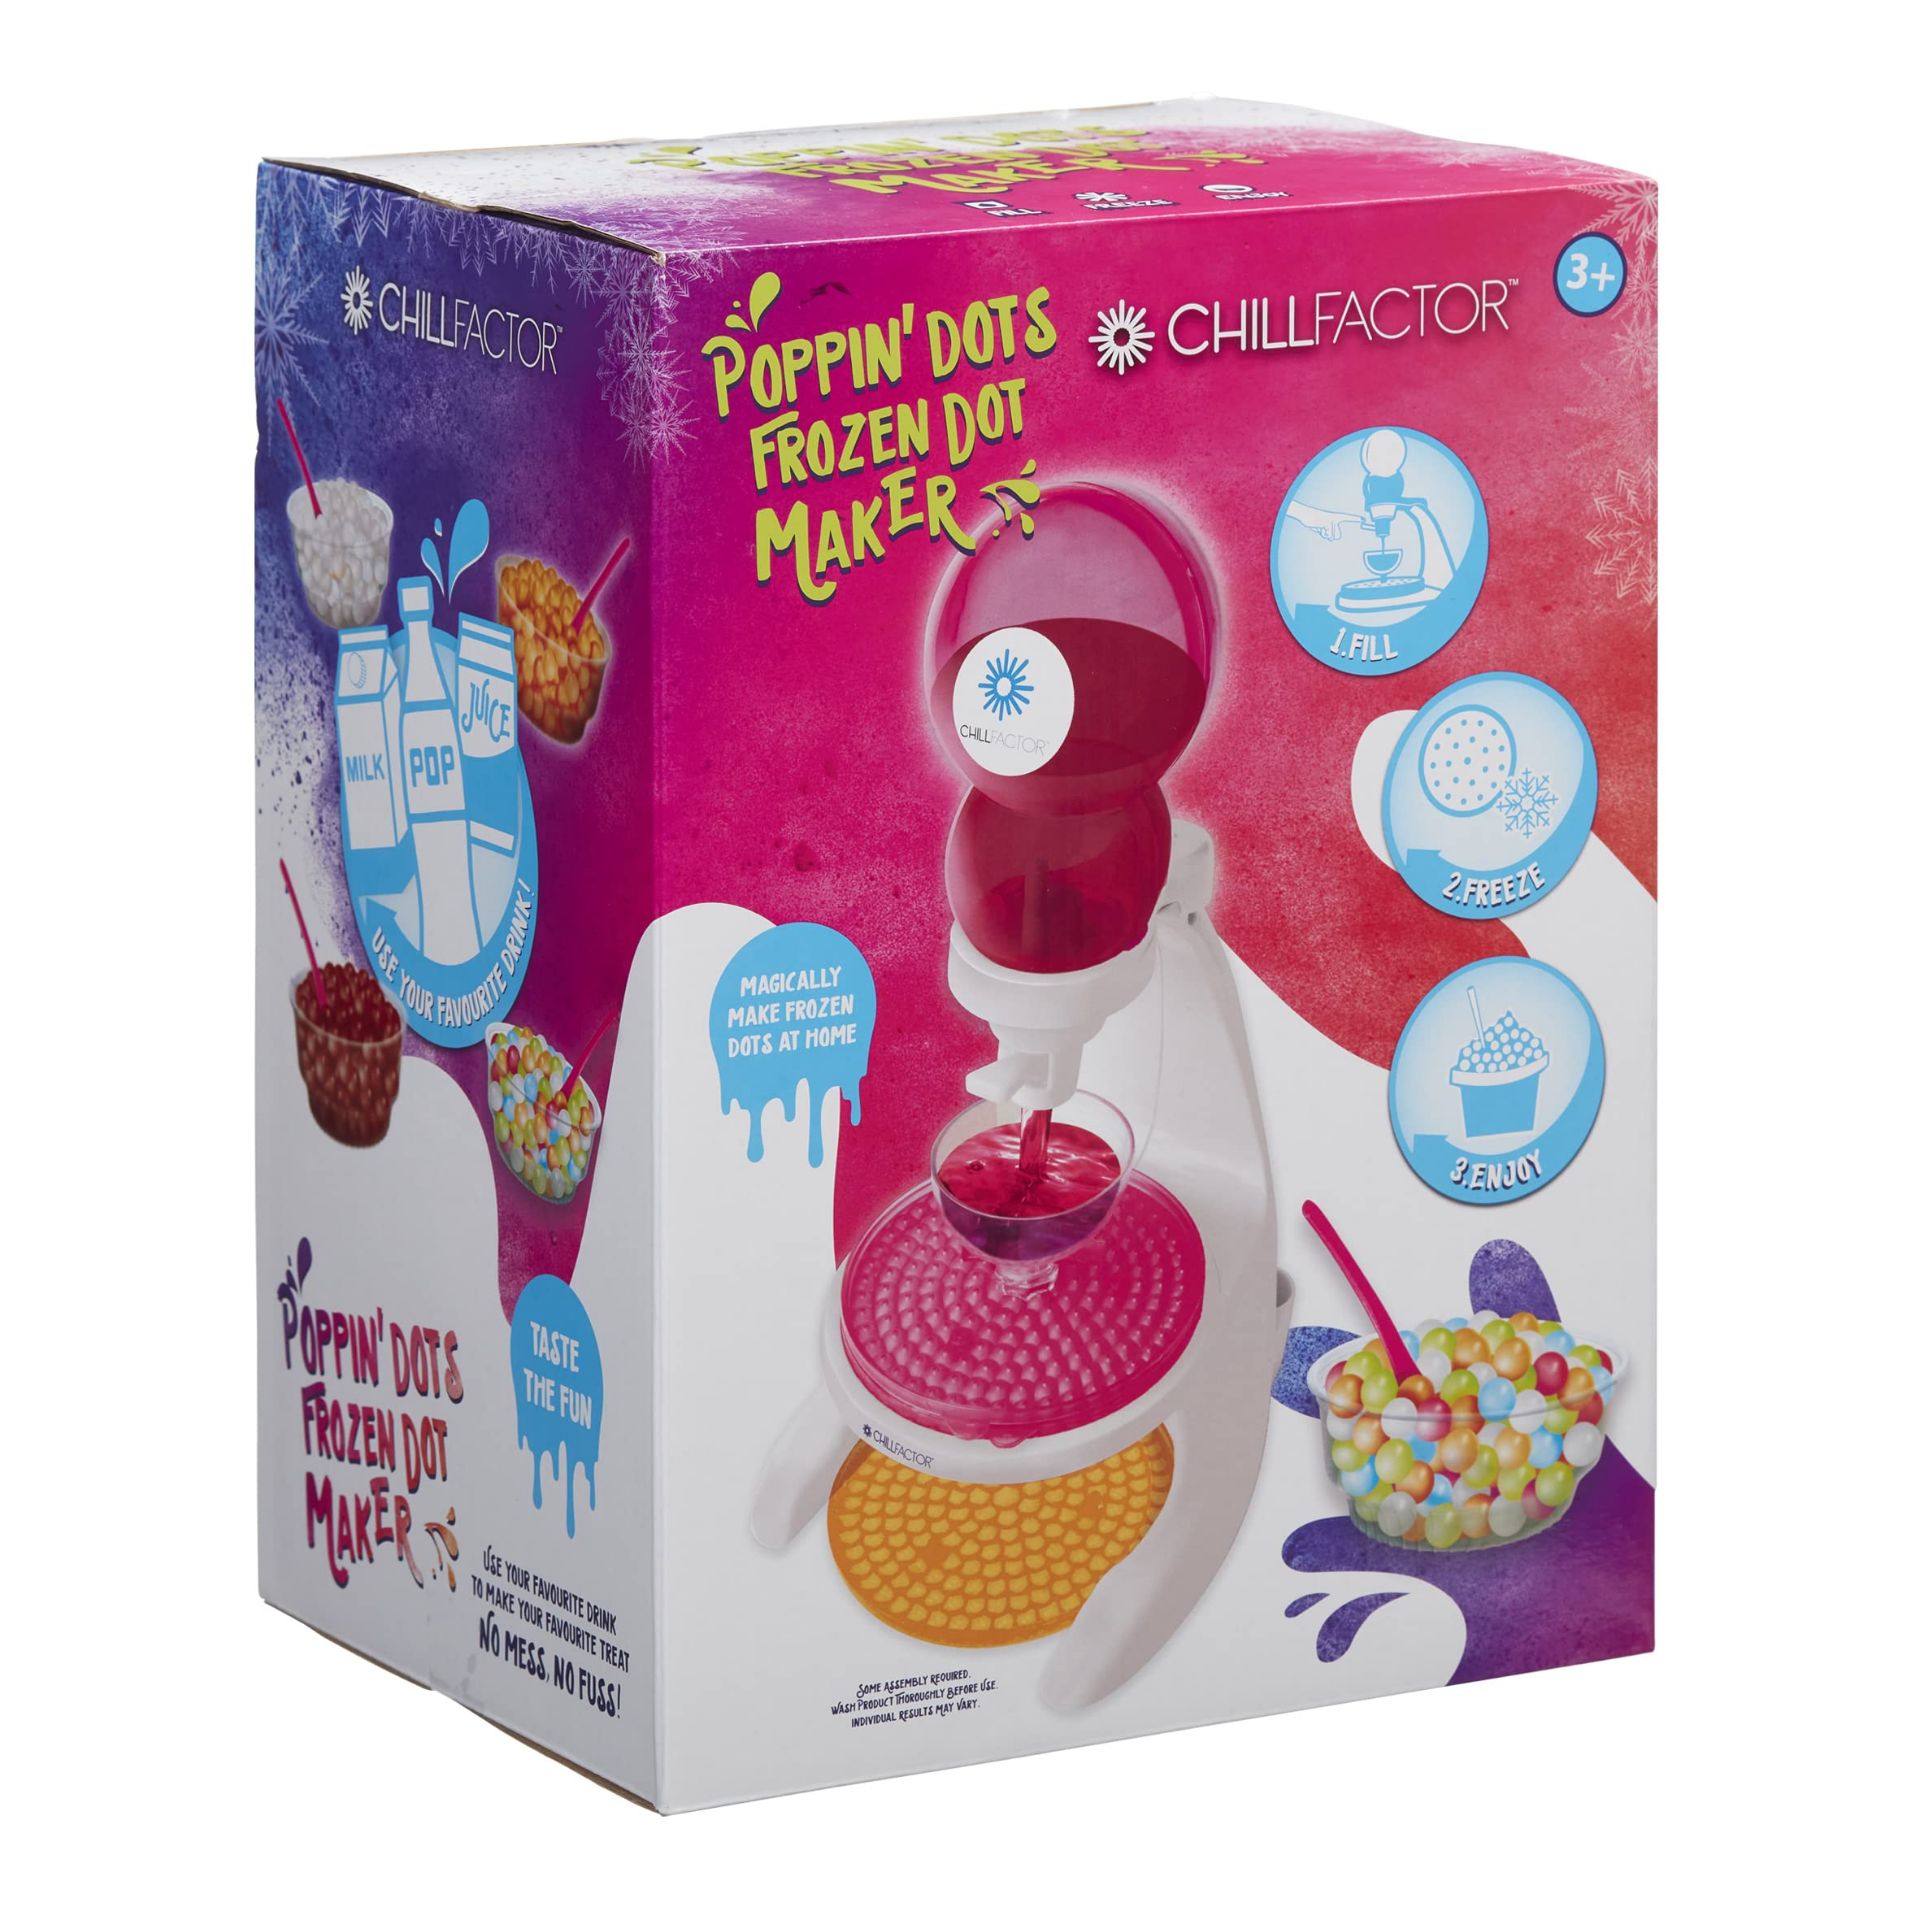 Poppin Dots Frozen Dot Maker Brand New (Delivery Band A)